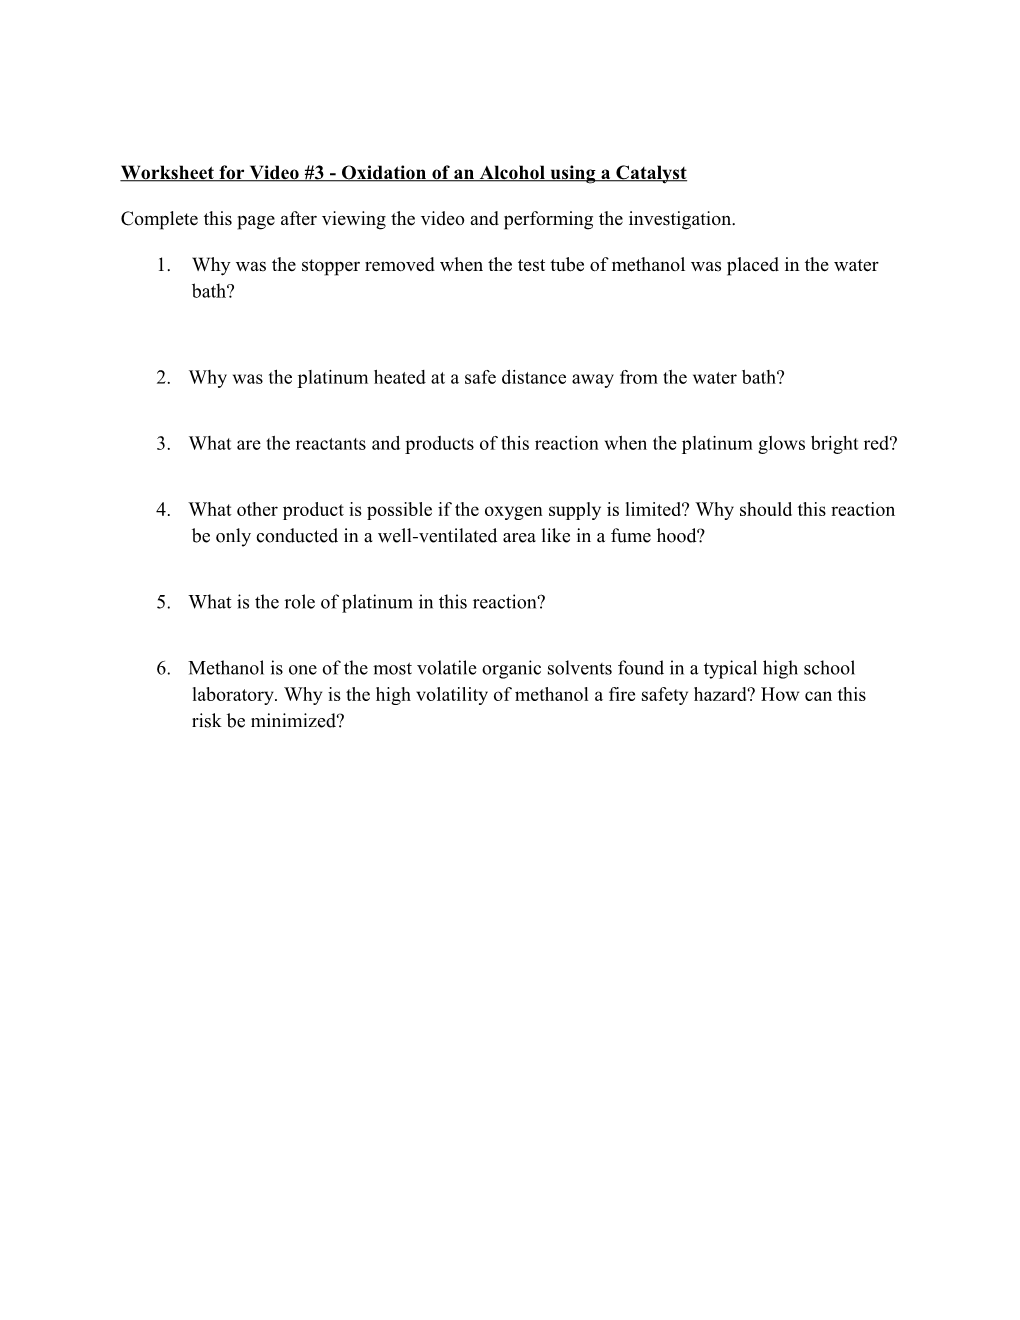 Worksheet for Video #3 - Oxidation of an Alcohol Using a Catalyst